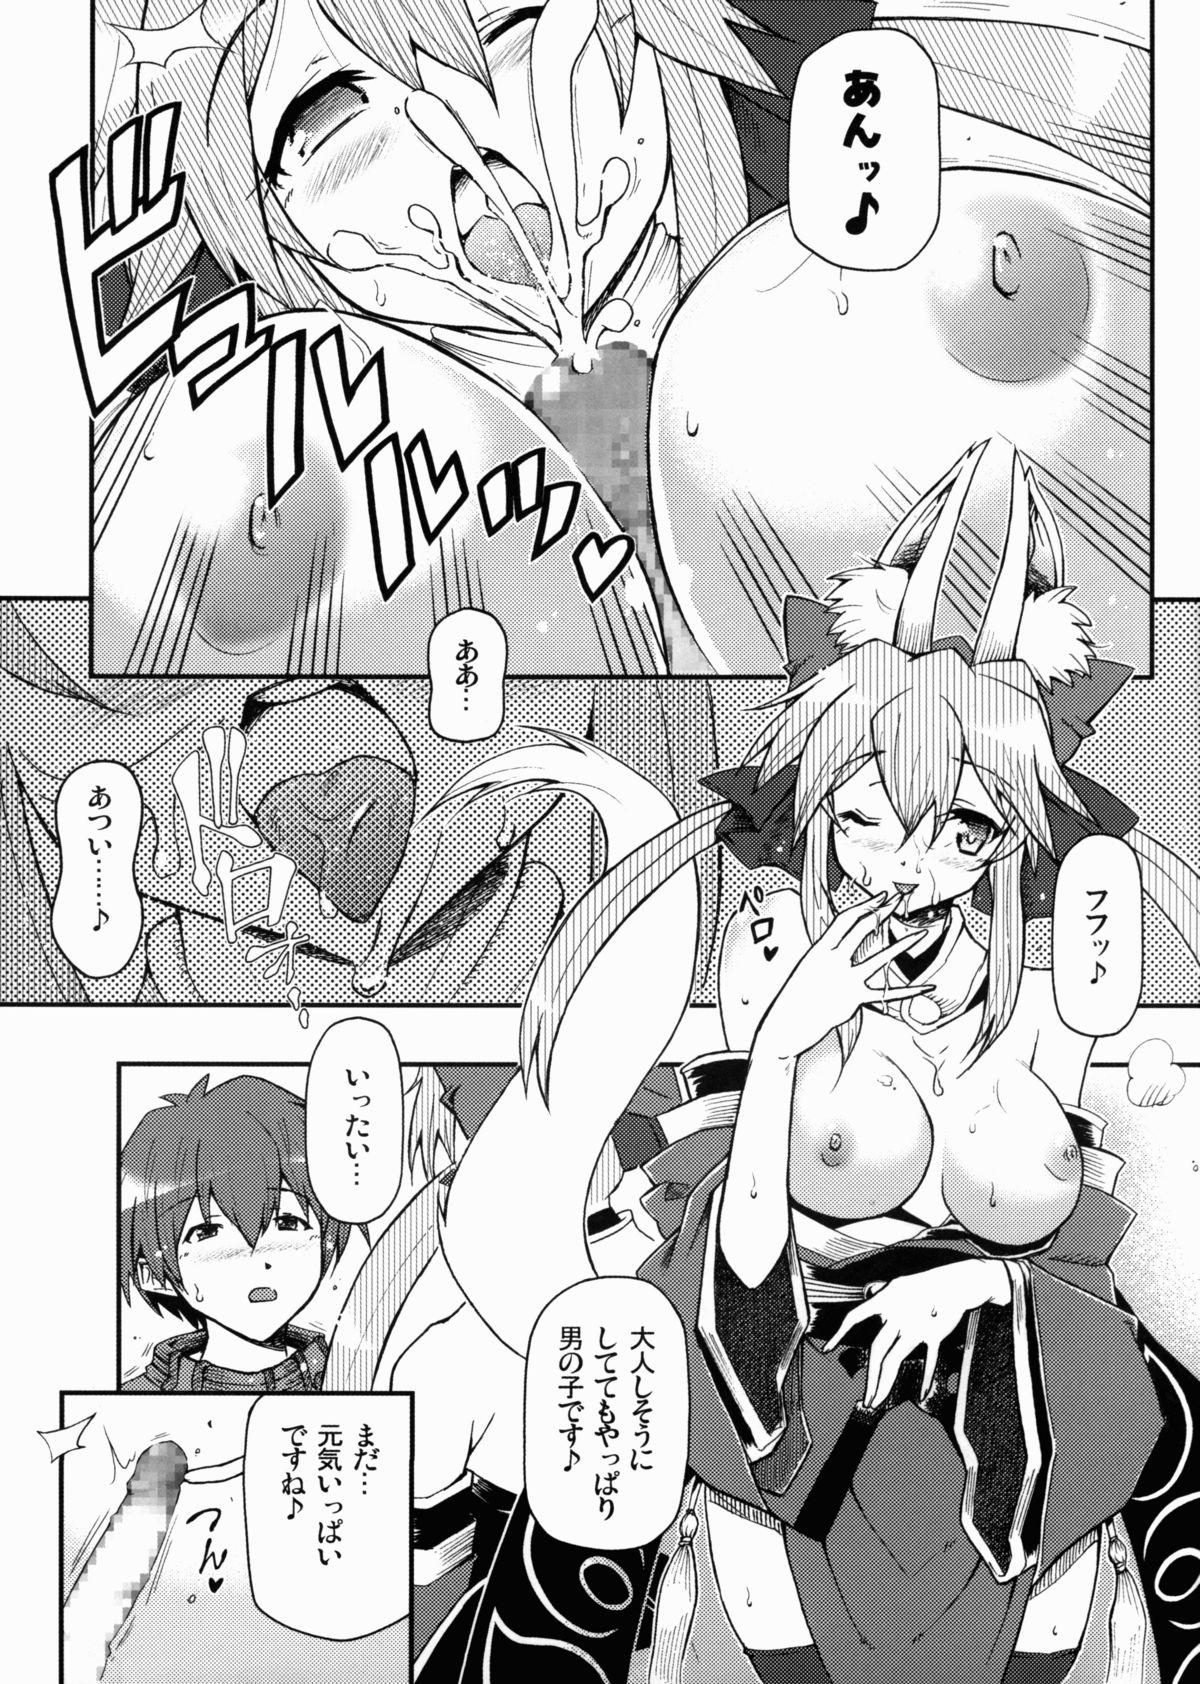 Masterbation 21st CENTURY FOX - Fate extra Time - Page 10